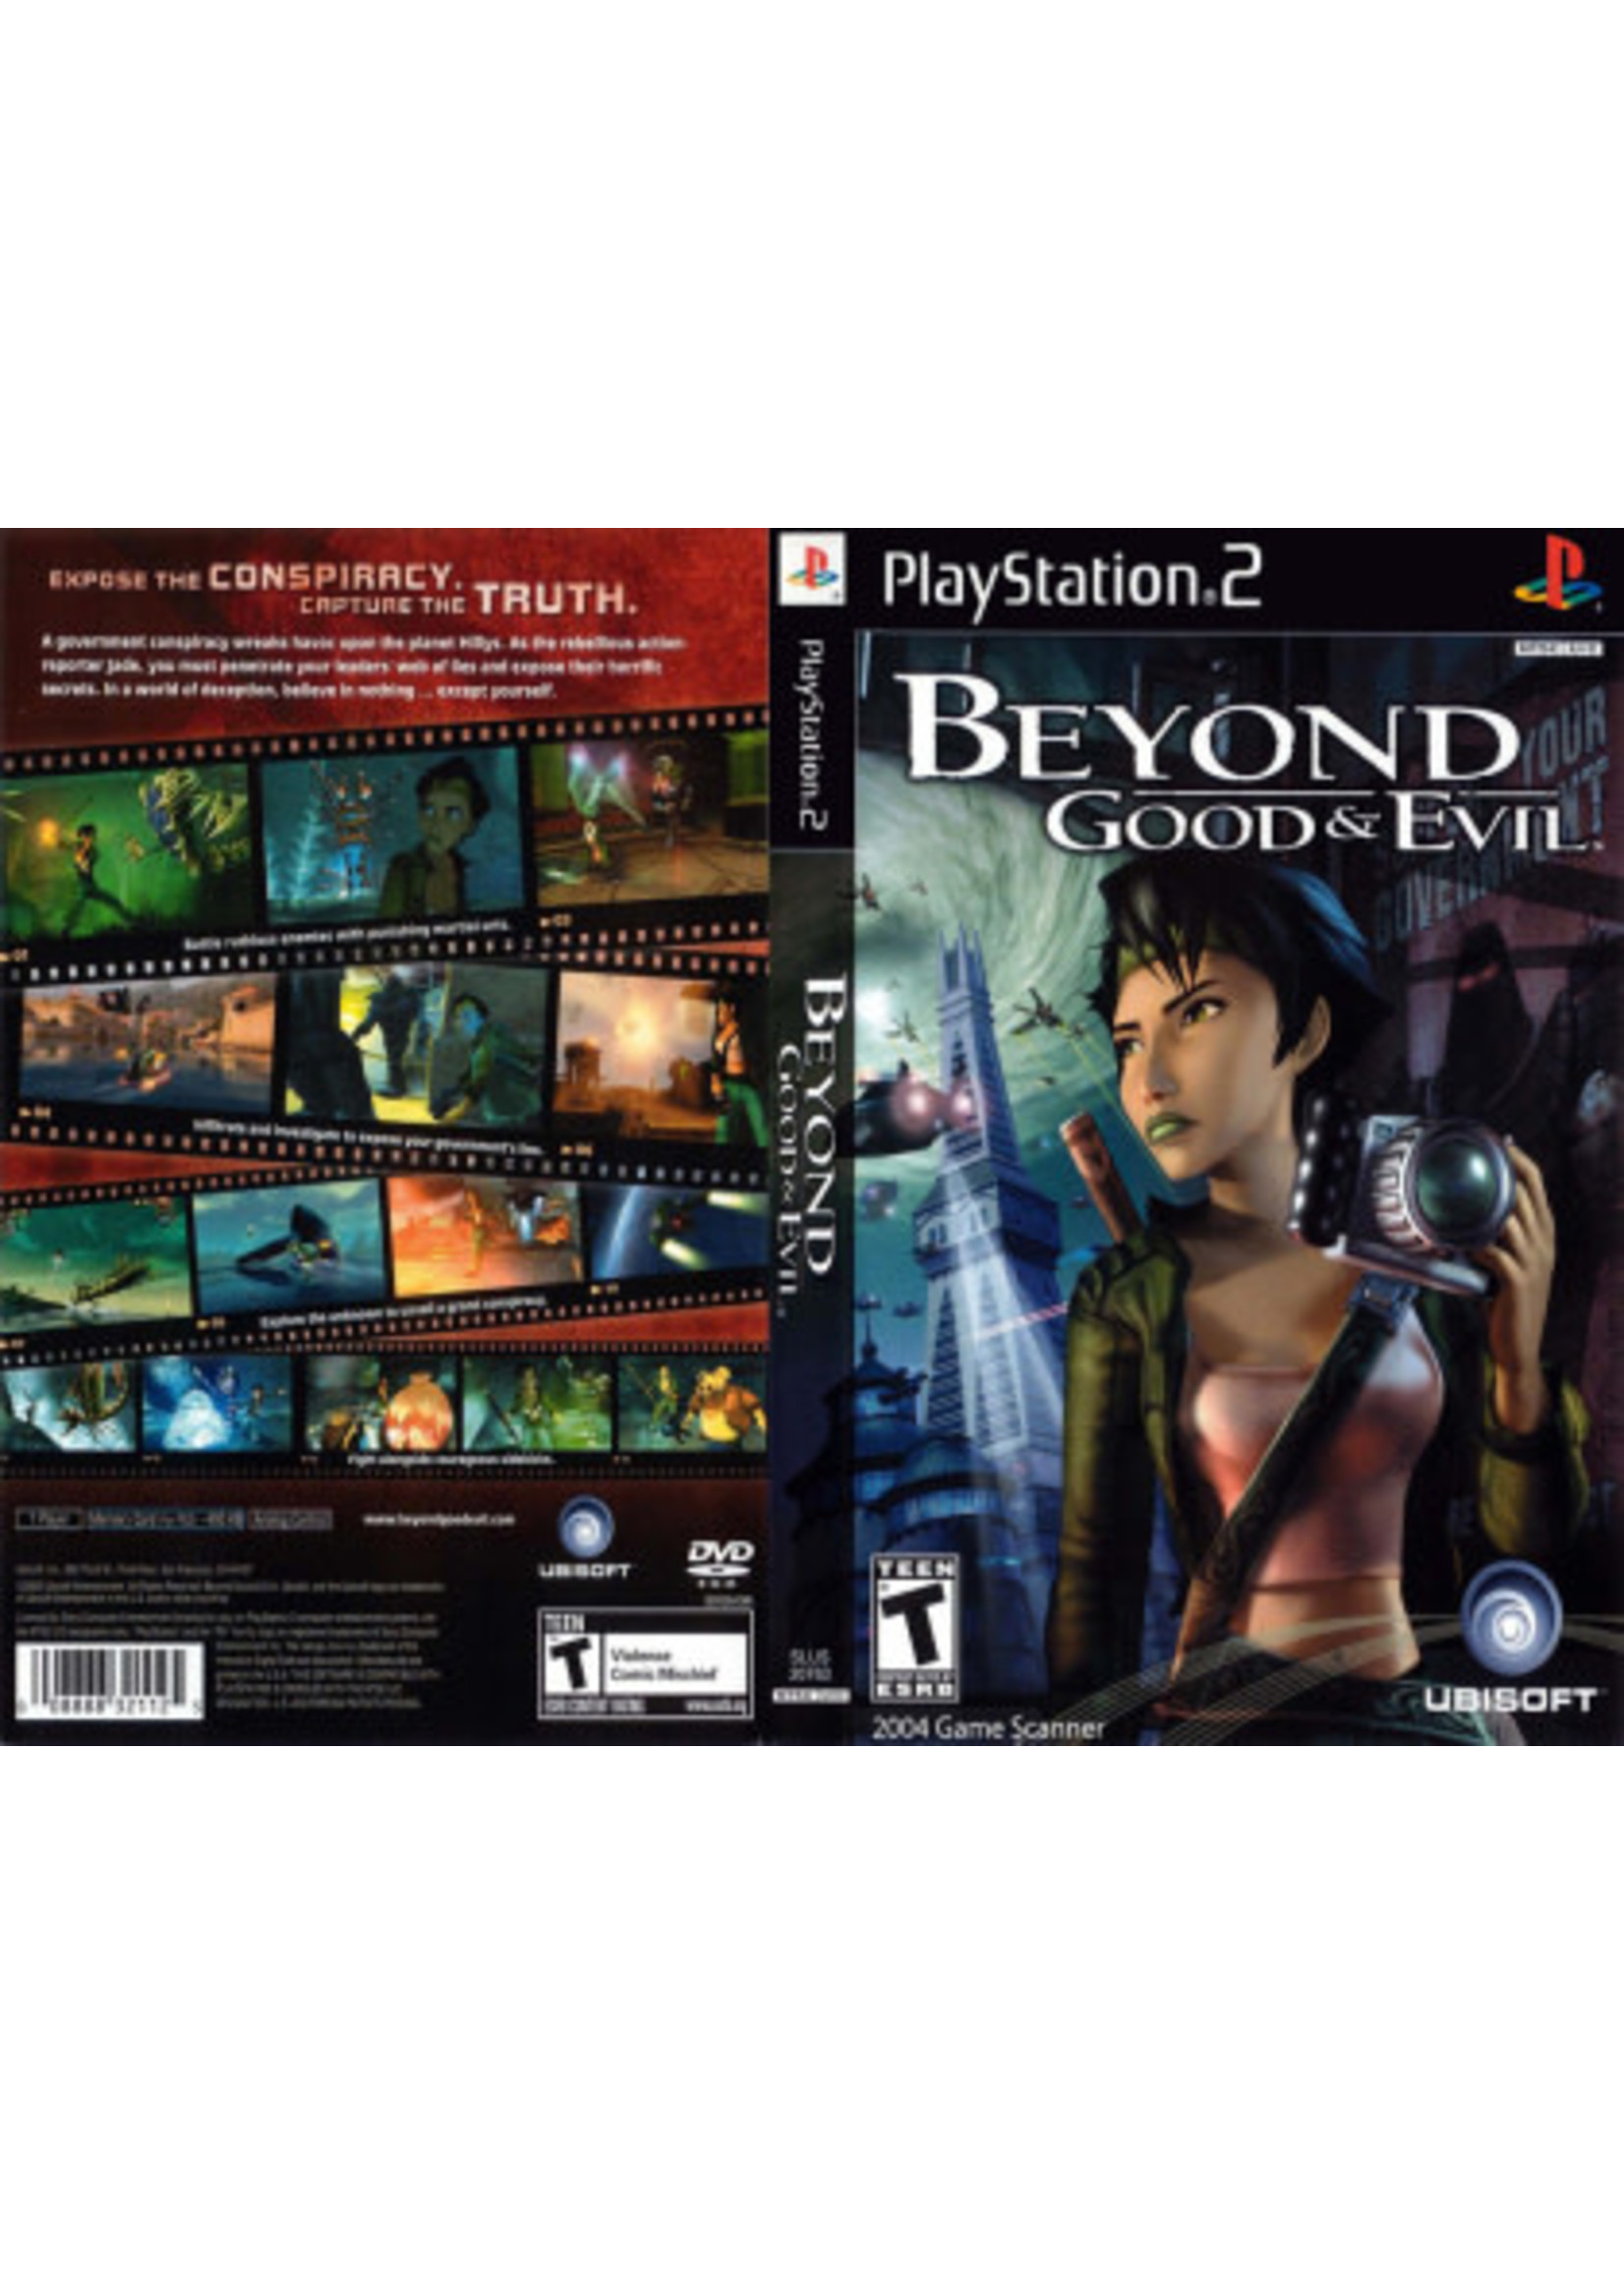 Sony Playstation 2 (PS2) Beyond Good and Evil